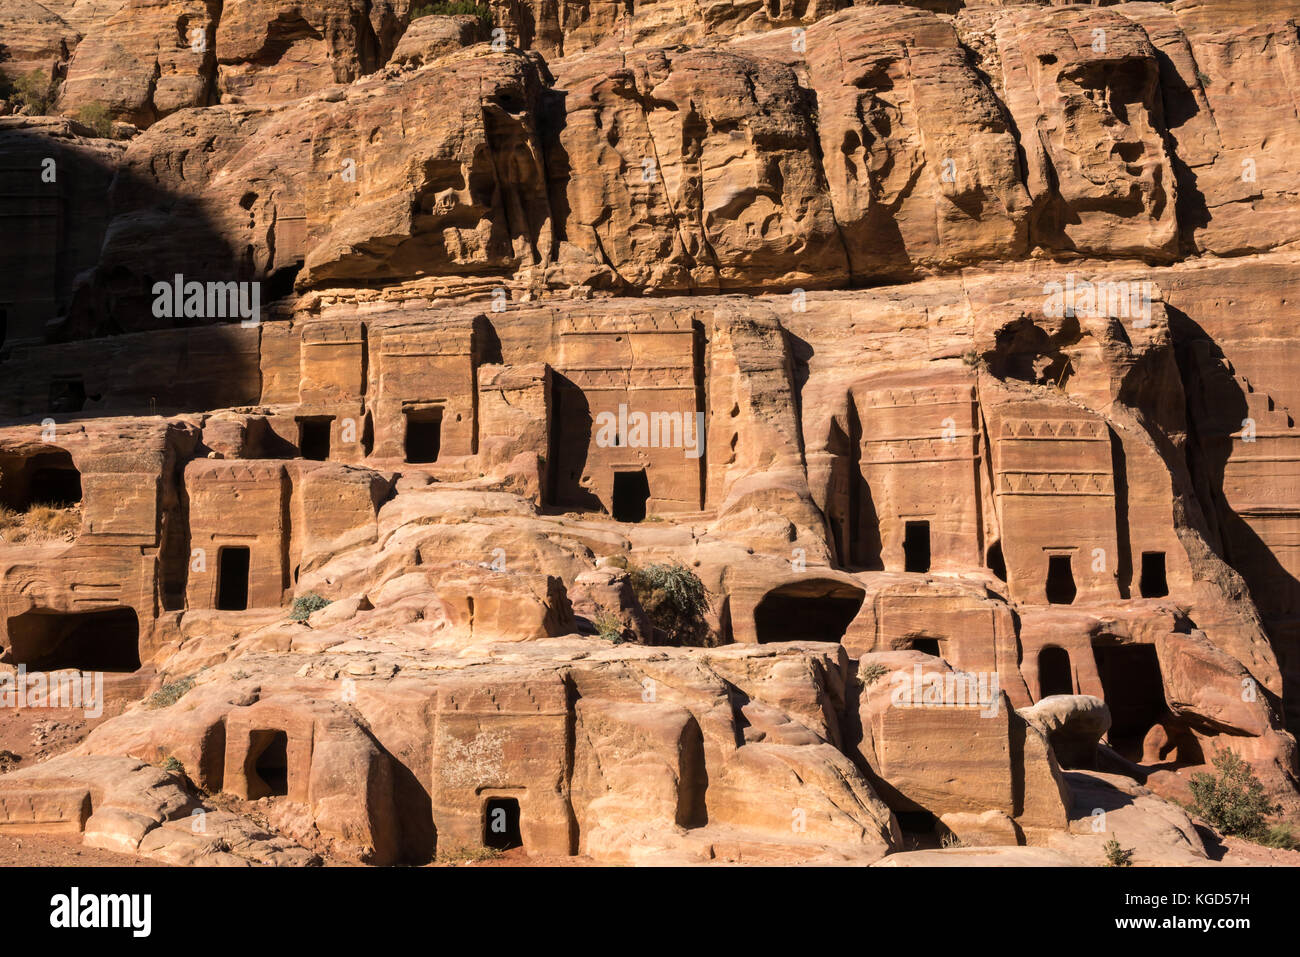 Pink sandstone carved Nabataean tombs, Street of Facades, lit by early morning sun, Petra, Jordan, Middle East Stock Photo